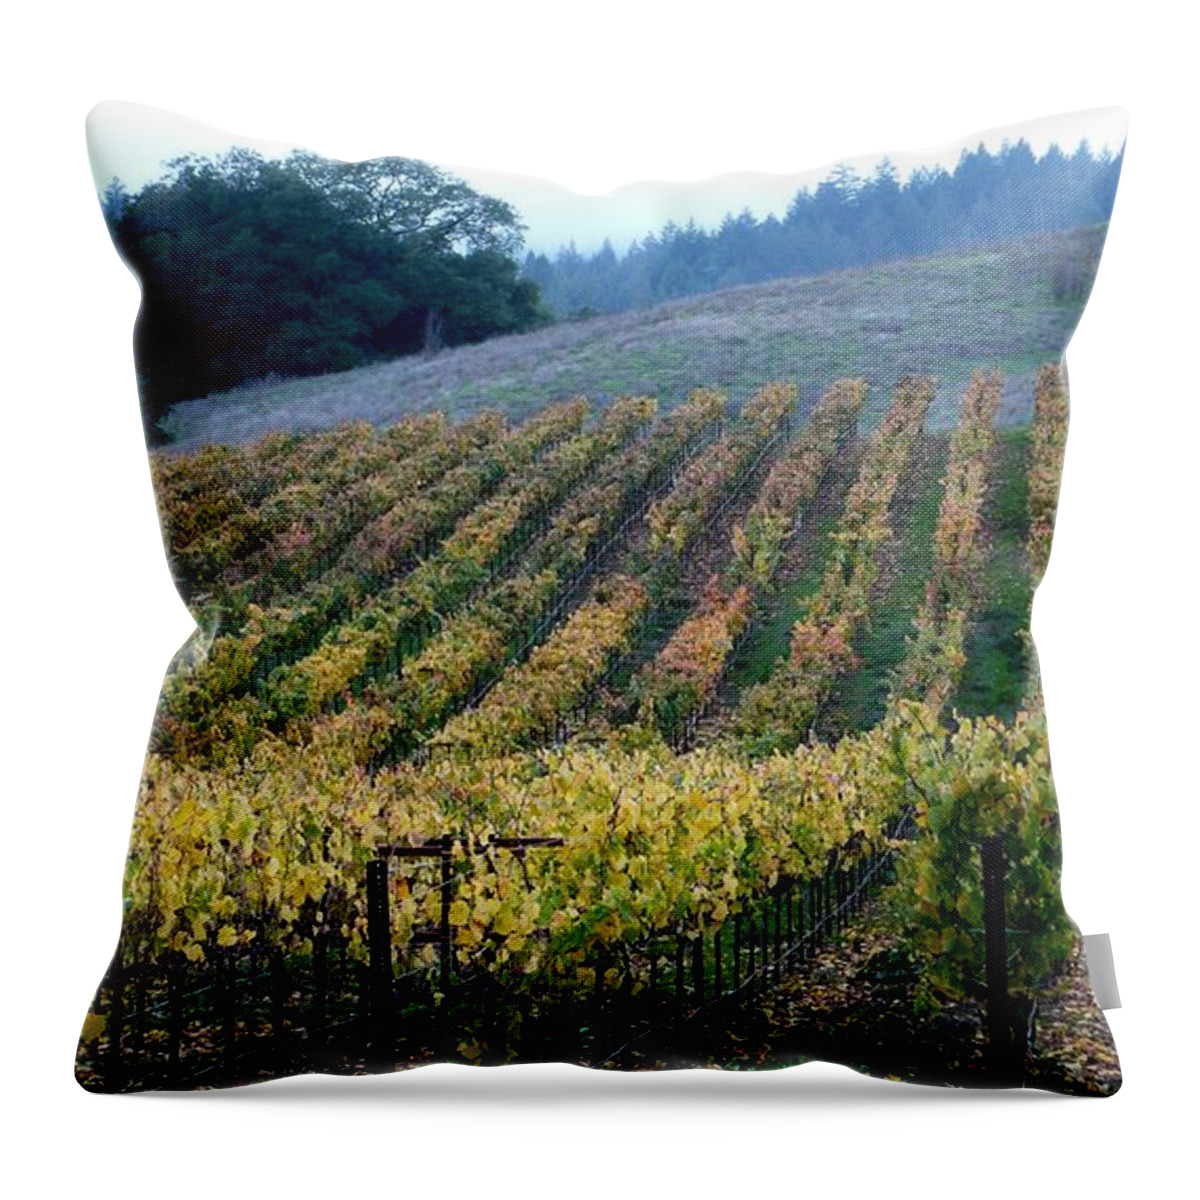 Vineyards Throw Pillow featuring the photograph Sonoma County Vineyards Near Healdsburg by Charlene Mitchell